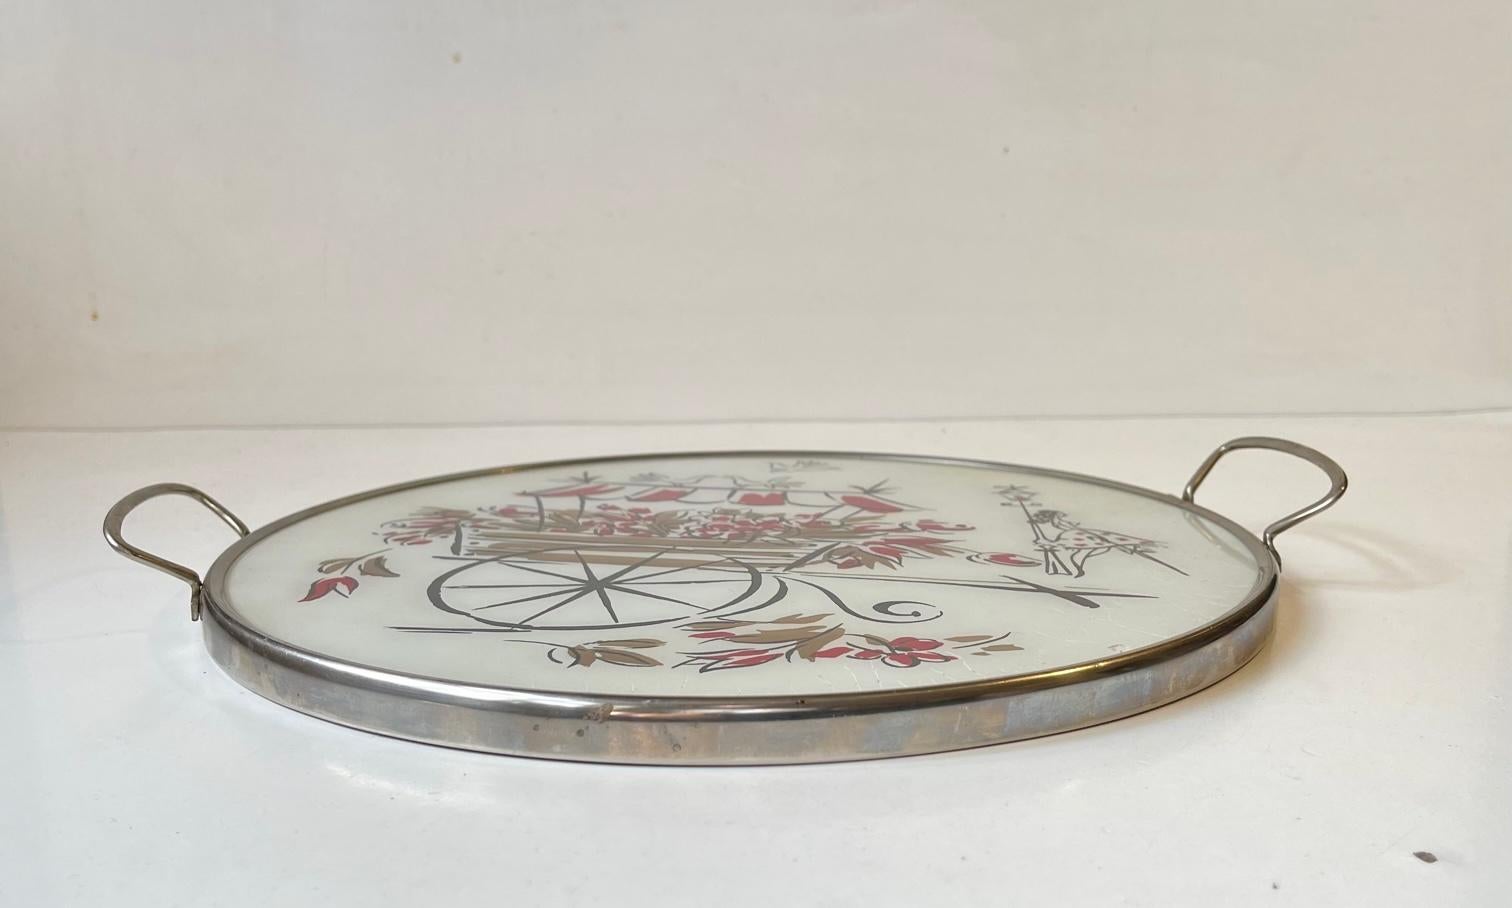 A stylized 1950s circular tray for drinks. It is made from chrome-plated metal featuring an acrylic front decorated with a flower tow truck and a lady in a dotted dress. Manufactured during the 1950s or early 60s in either Italy or Japan.